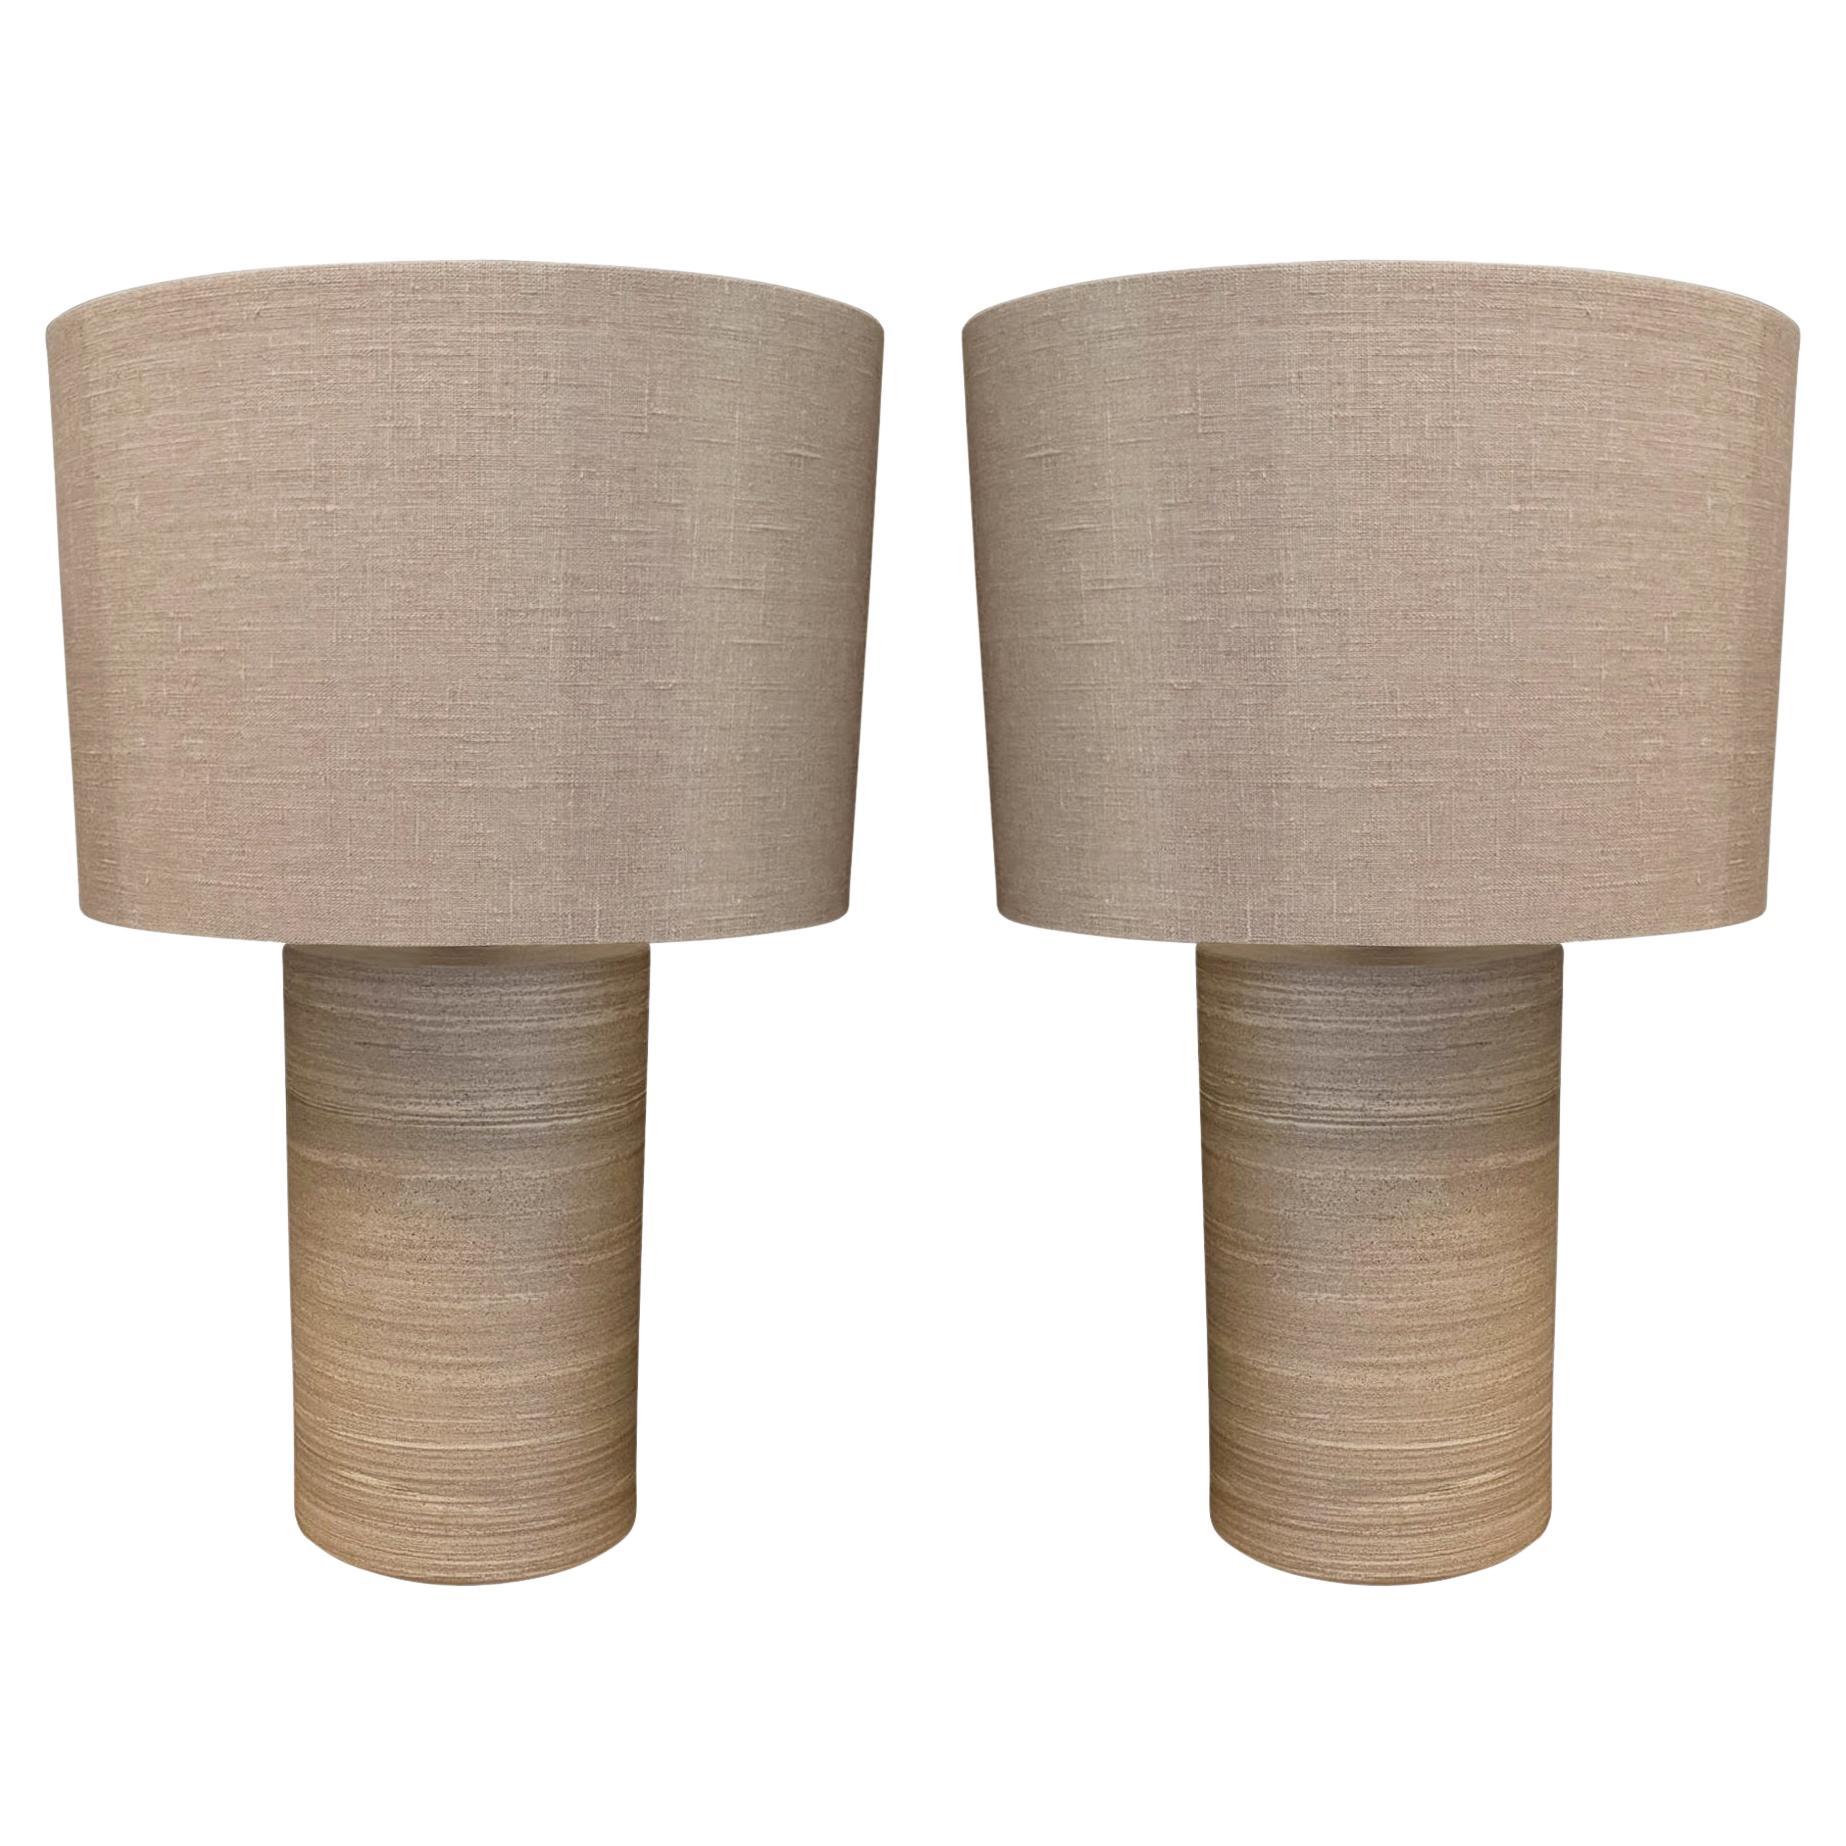 Stone Round Cylinder Shaped Base Pair Lamps With Shades, Germany, Contemporary